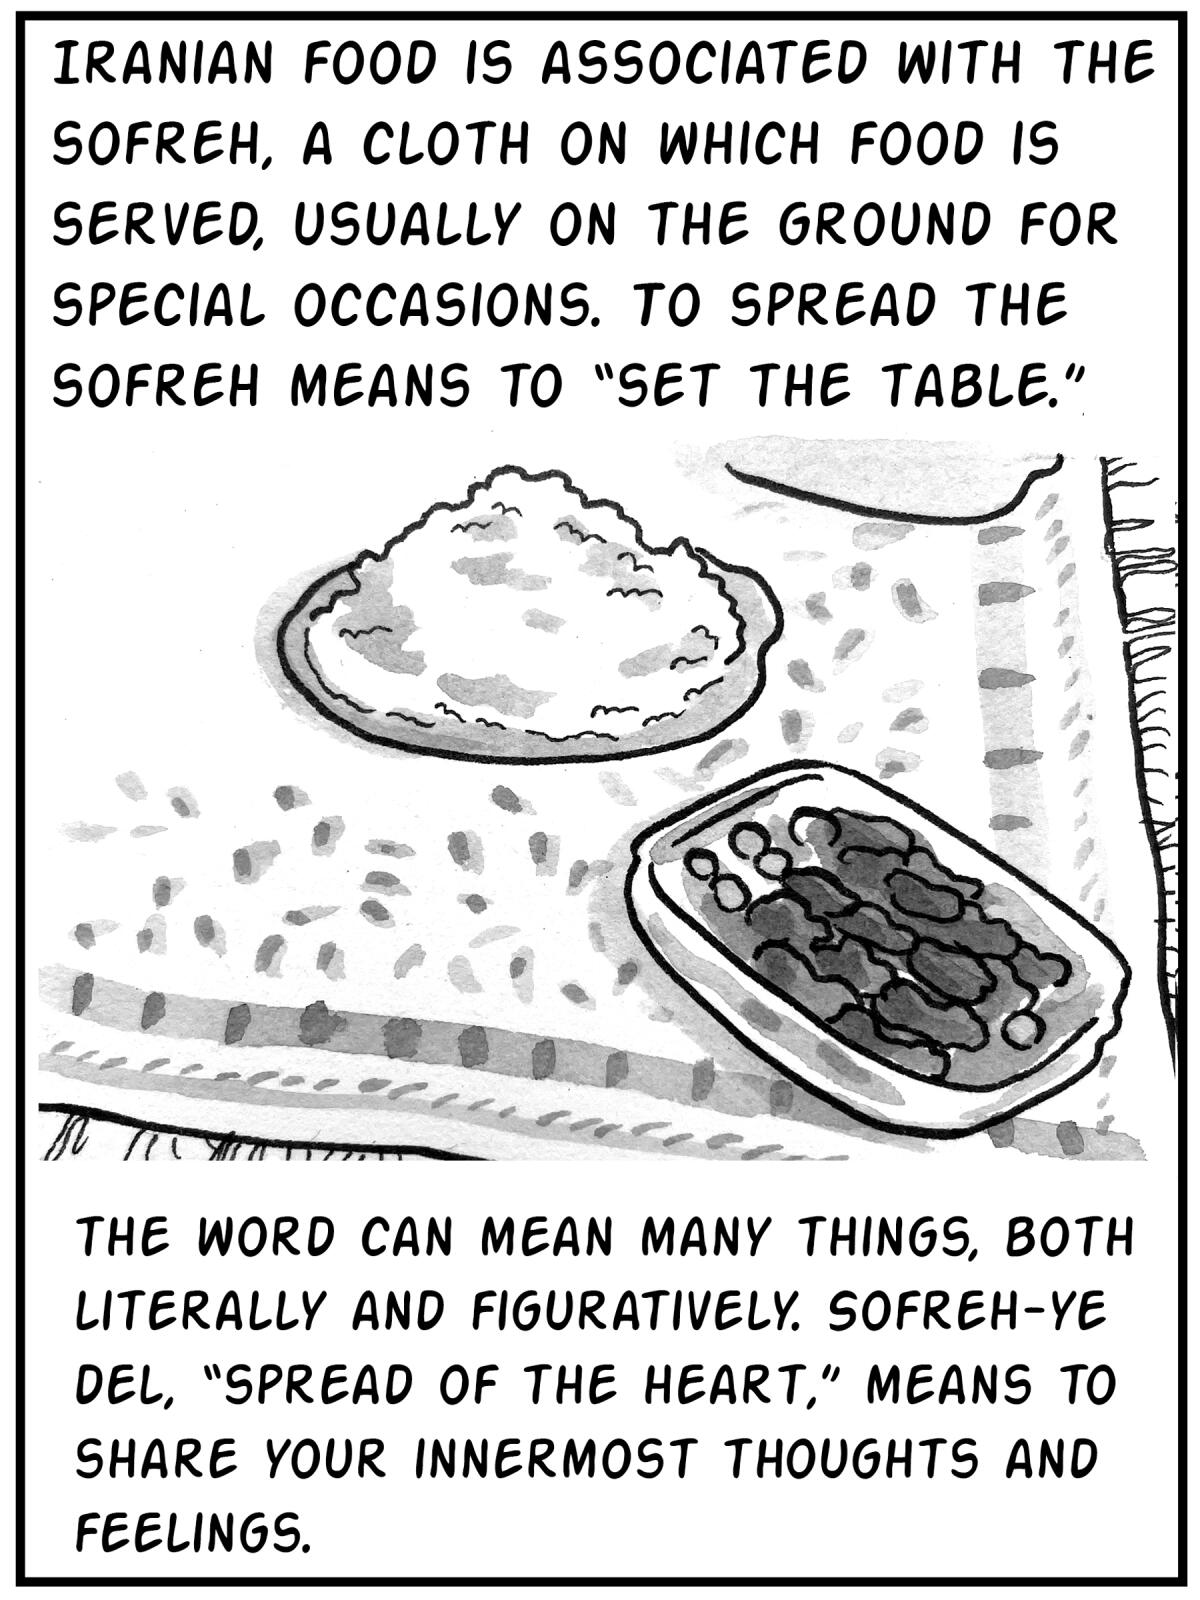 Iranian food is associated with the sofreh, a cloth on which food is served. To spread the sofreh means to "set the table."